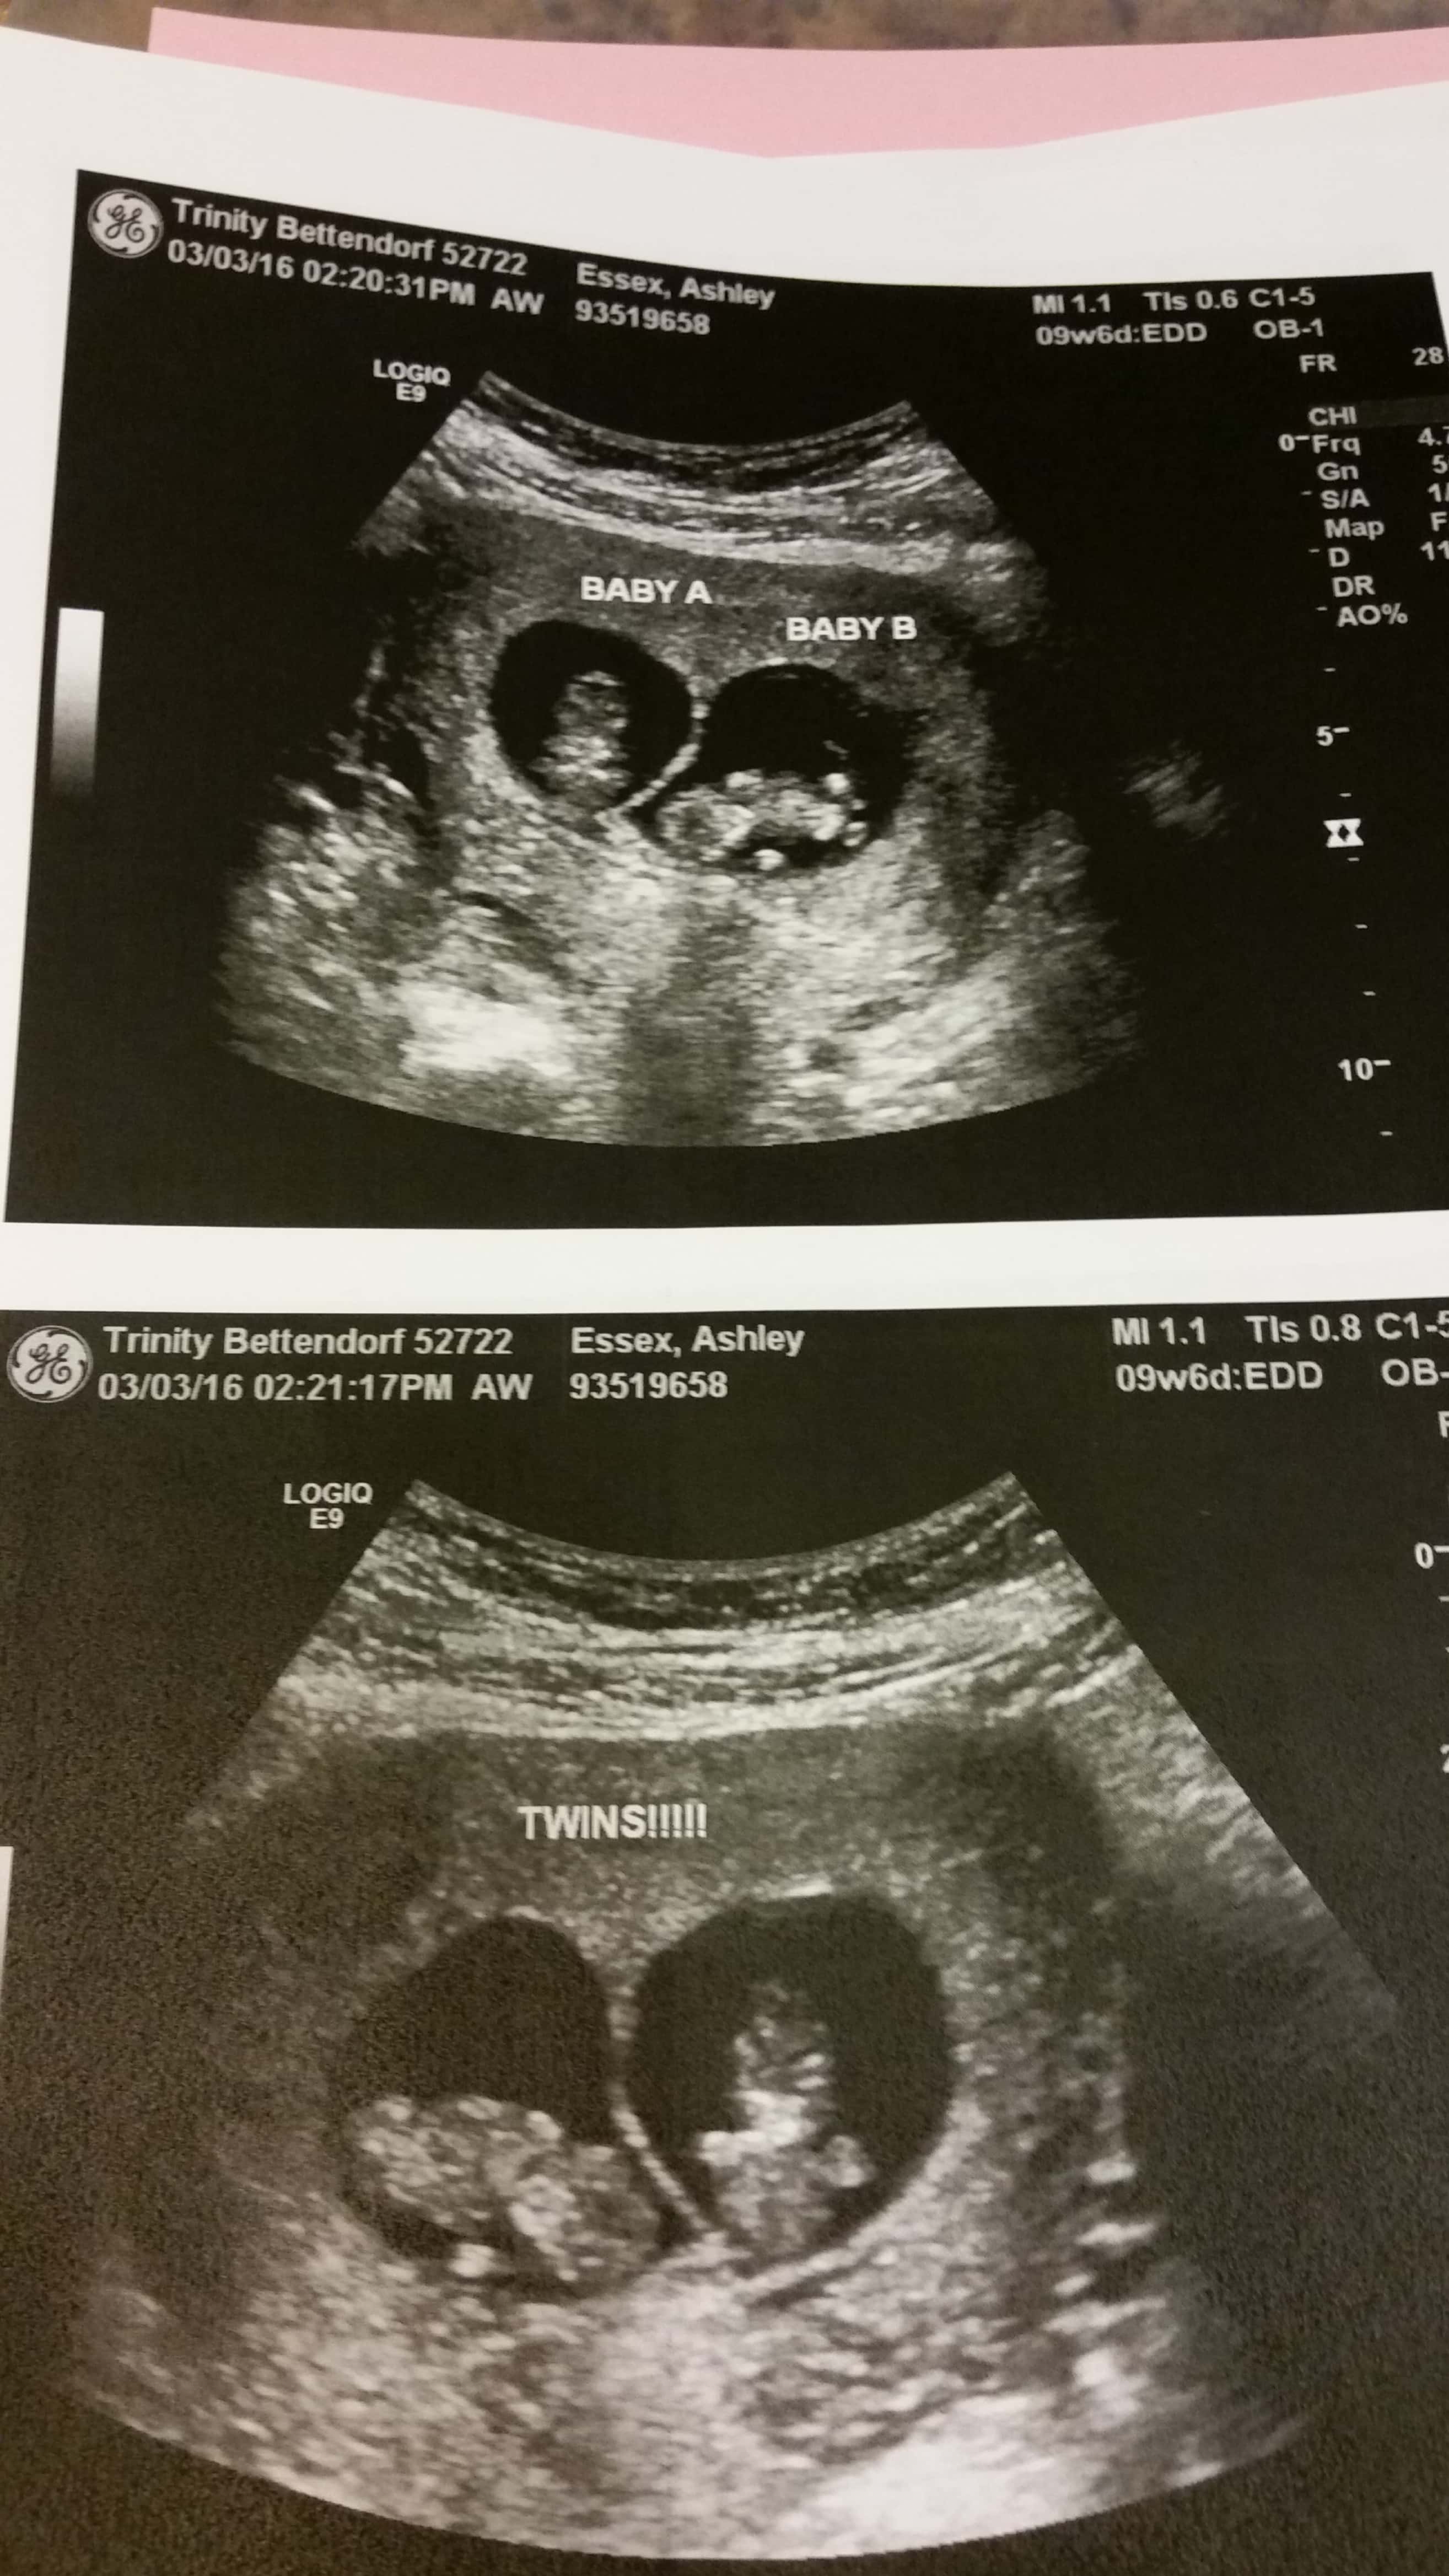 fraternal twins in the womb at 10 weeks